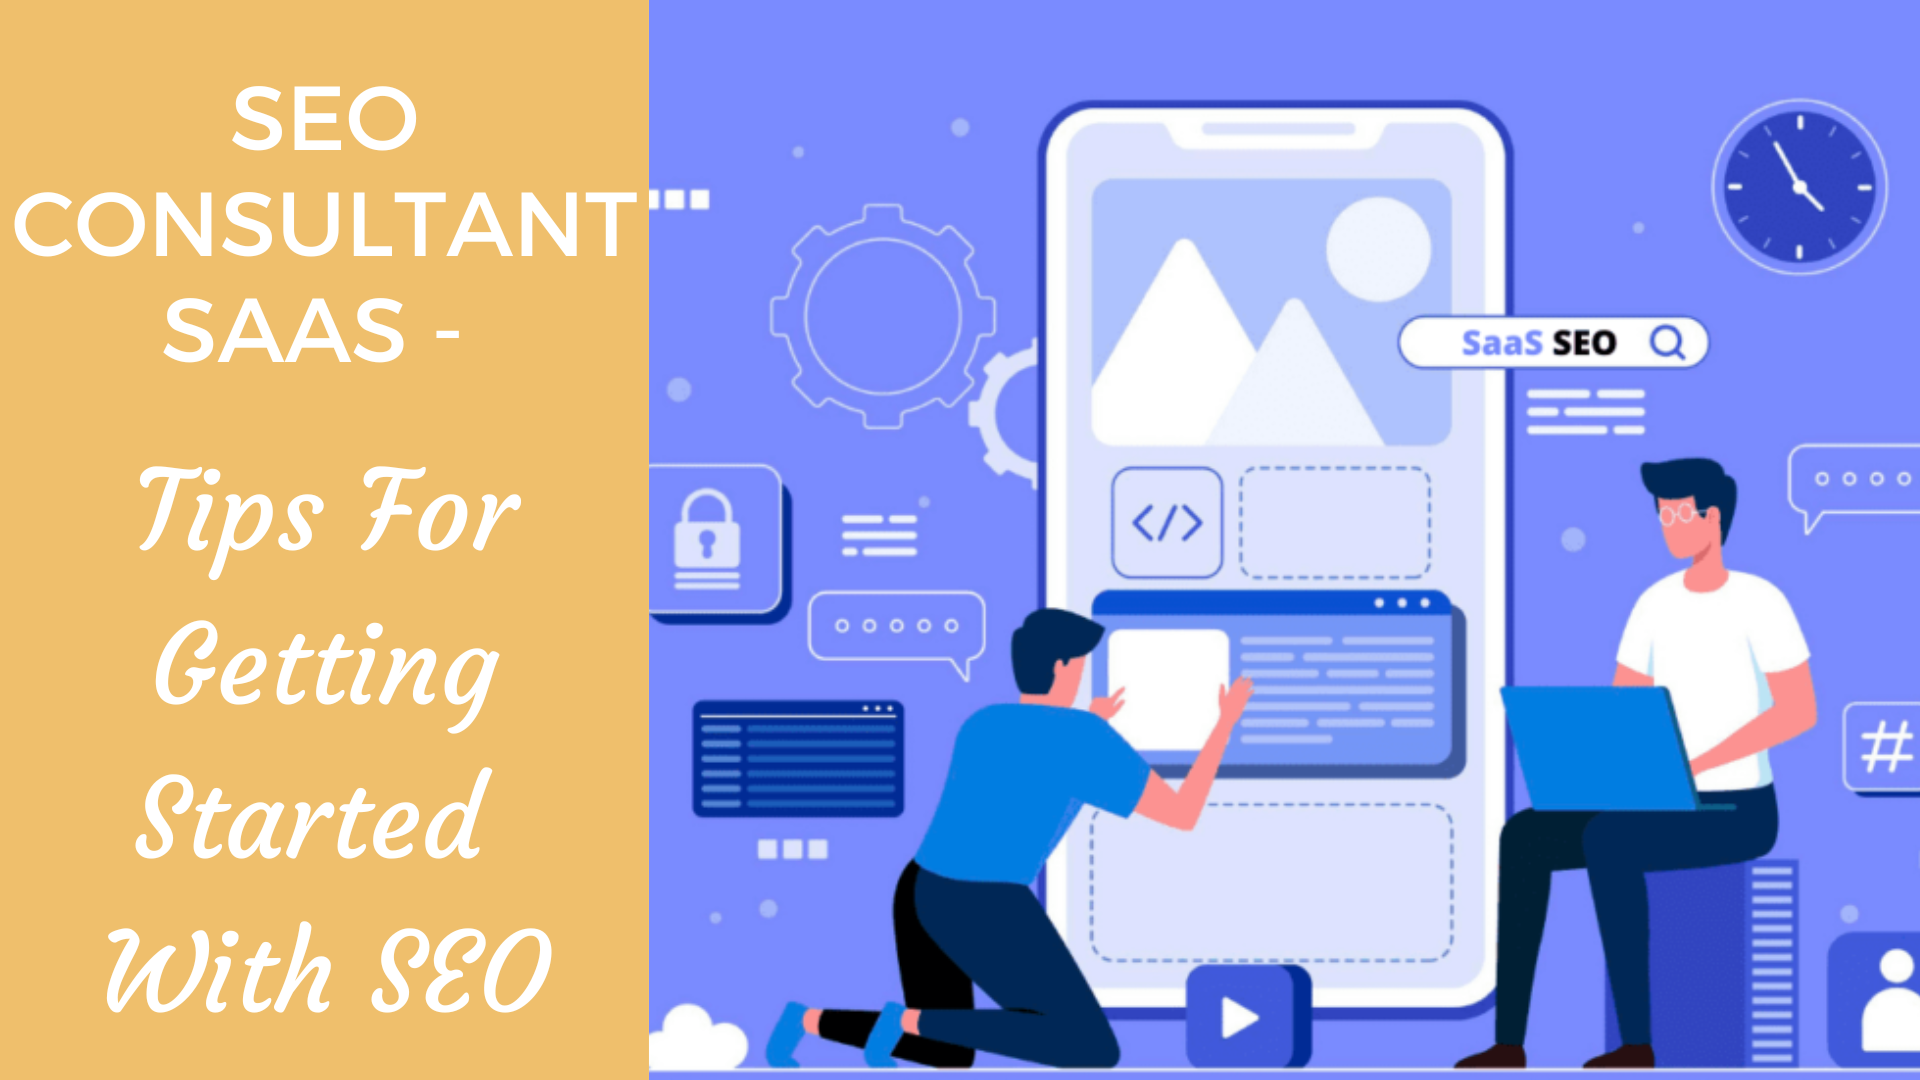 You are currently viewing SEO consultant SaaS – Tips For Getting Started With SEO